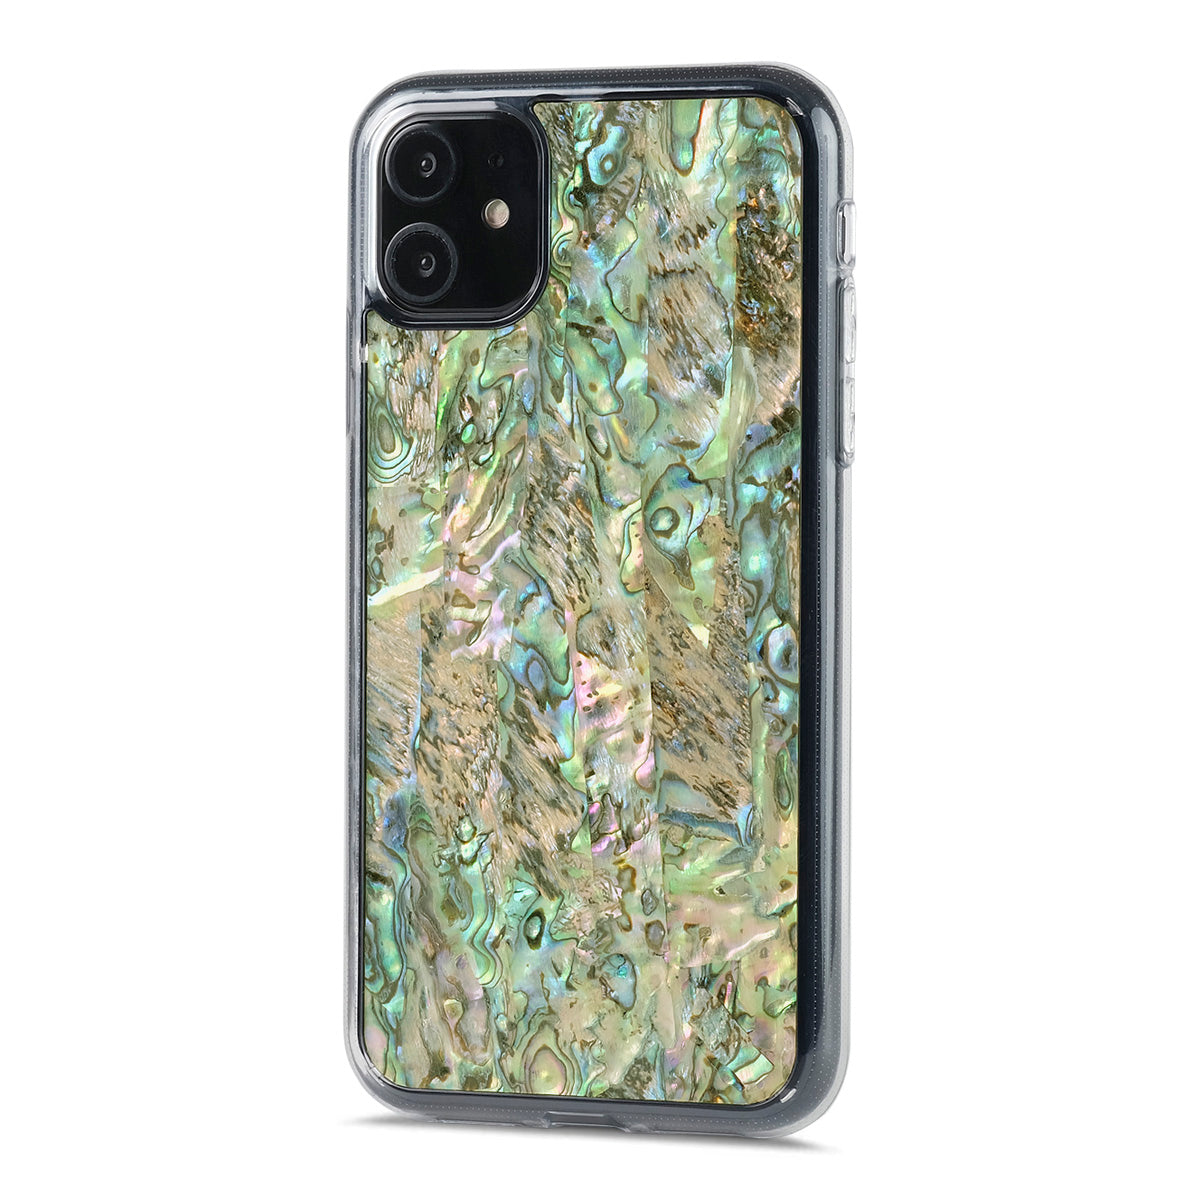 New Zealand Paua Iphone 11 Shell Explorer Case Shell Cases Cover Up